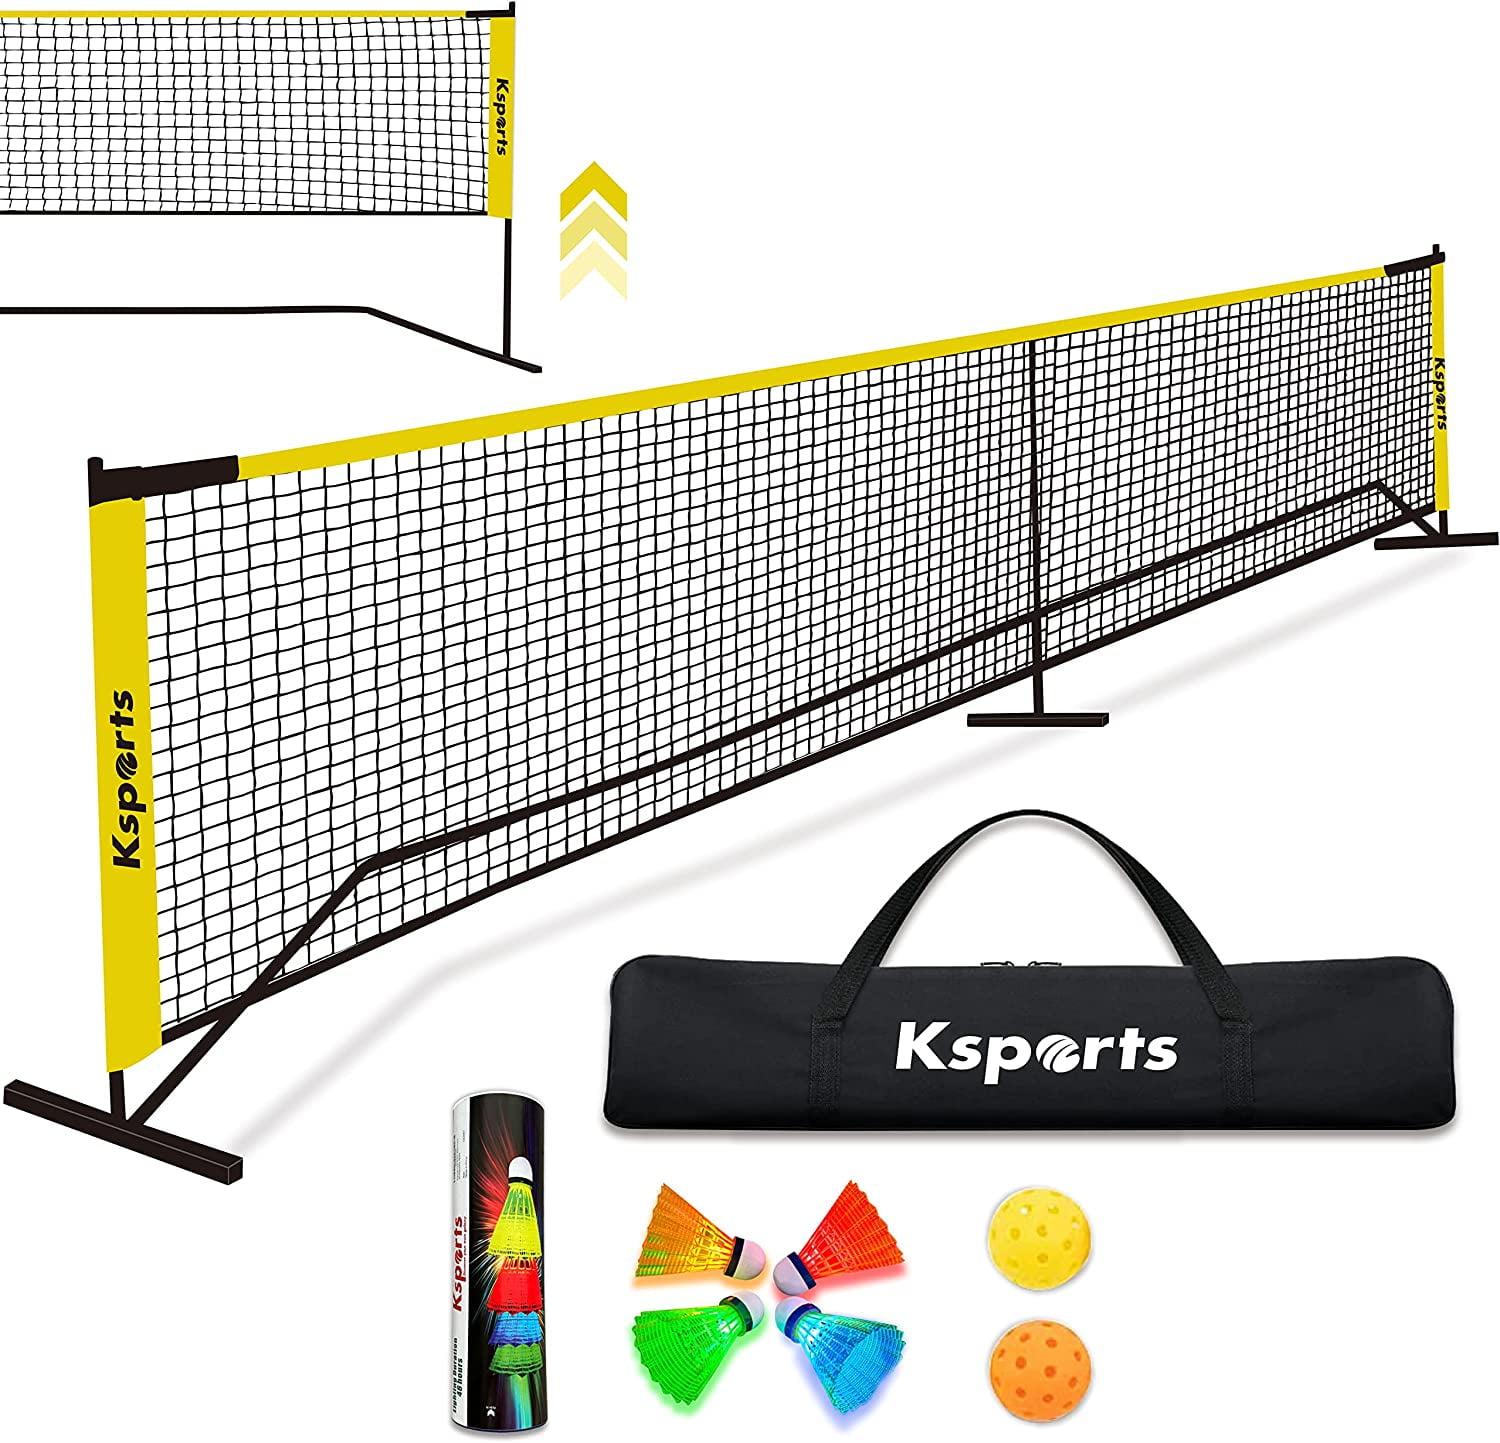 Ksports Regulation Size Pickleball Net 22 Feet Yellow, can be Used as  Recreation Tennis or Badminton Net, Comprises of Pickleball Portable Net, 4  LED